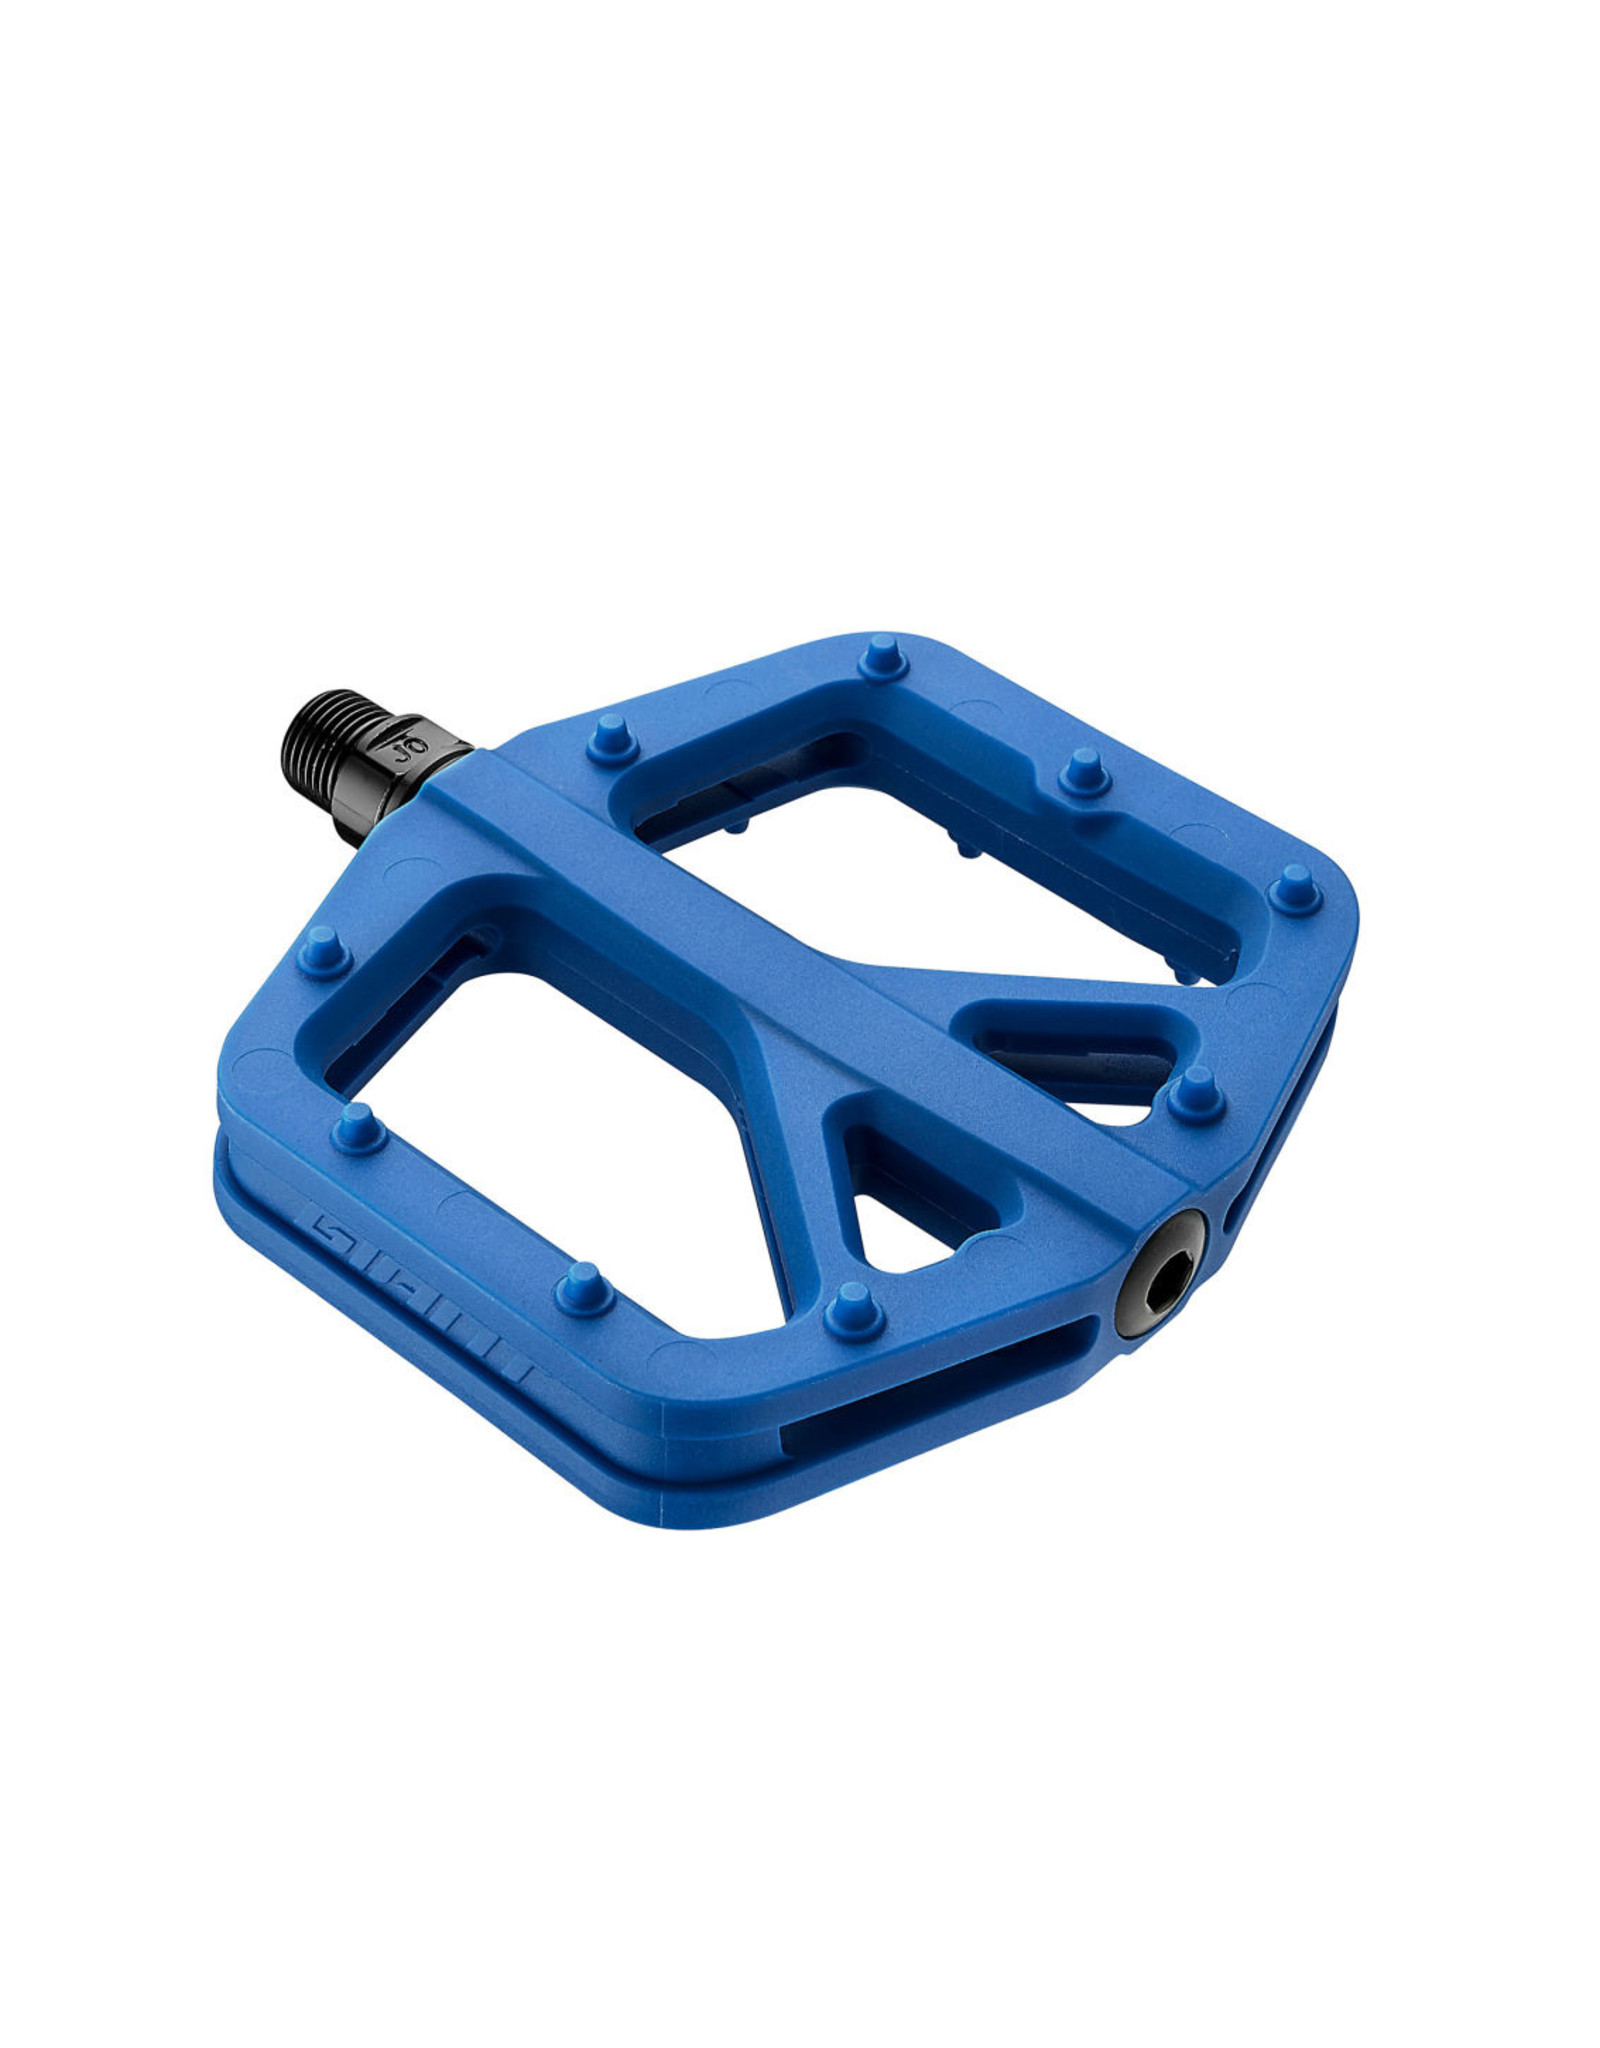 Giant Bicycles Pinner Composite Pedal Giant